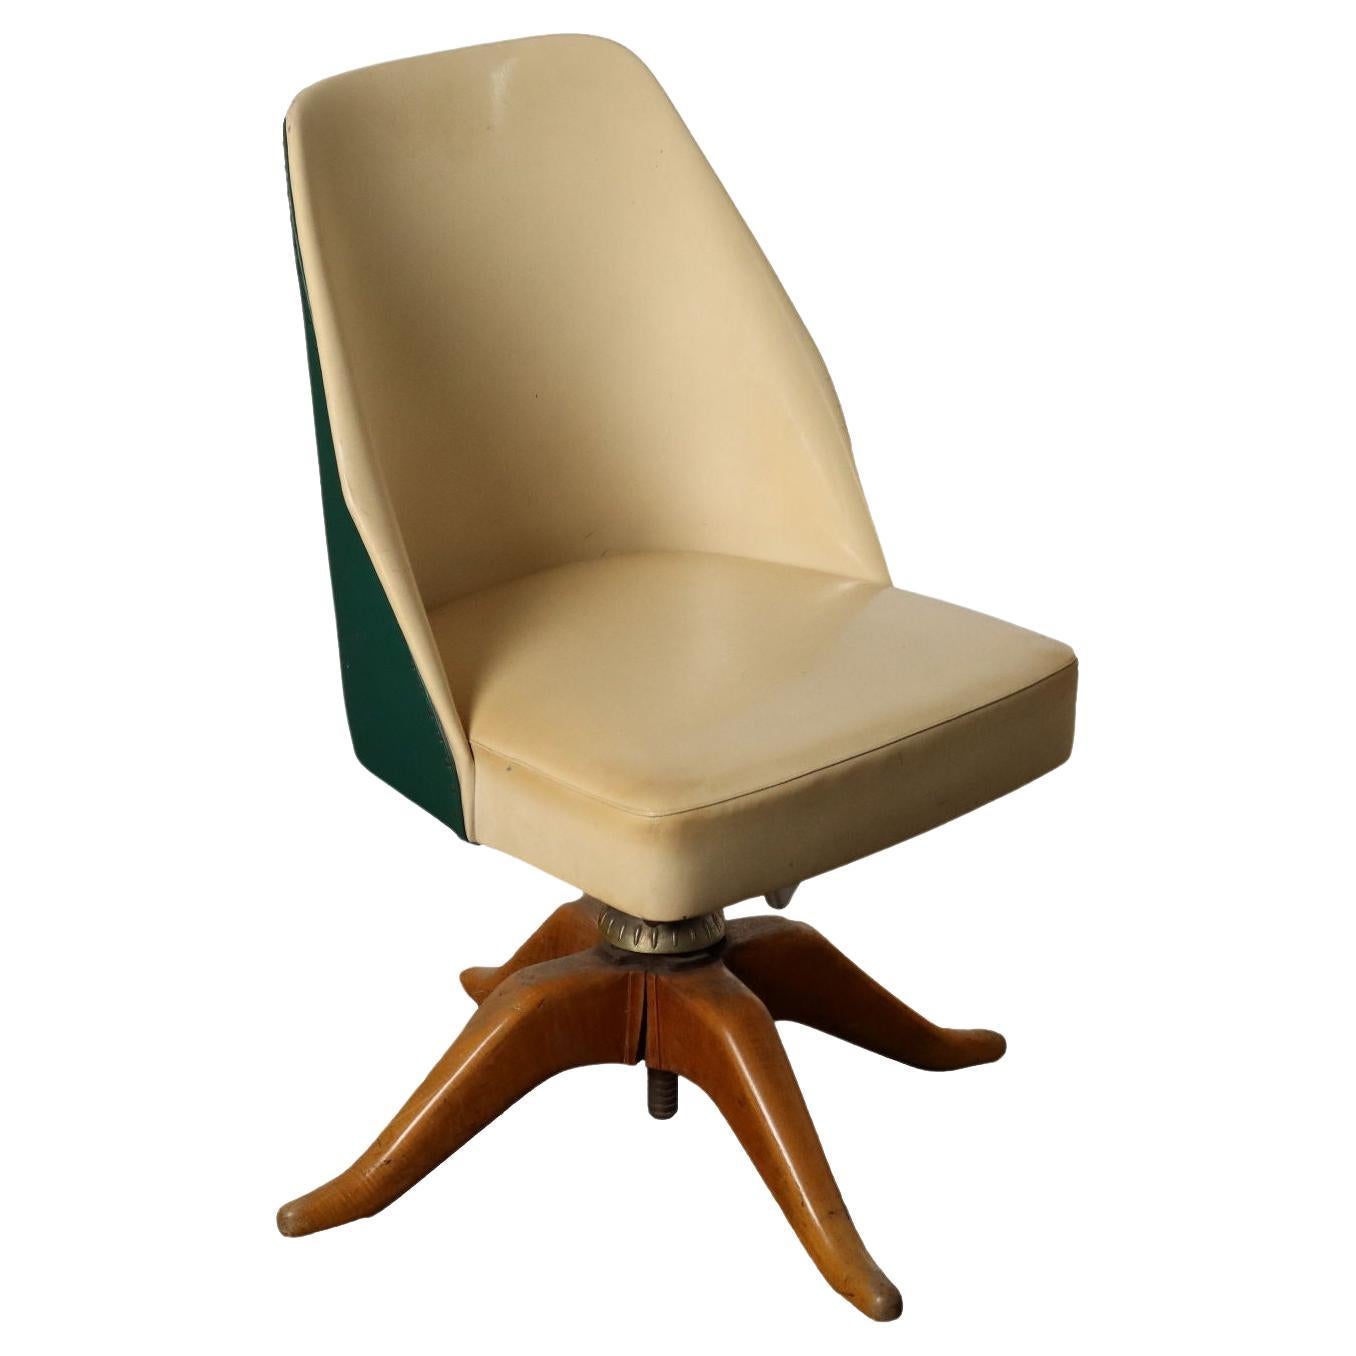 50's Chair